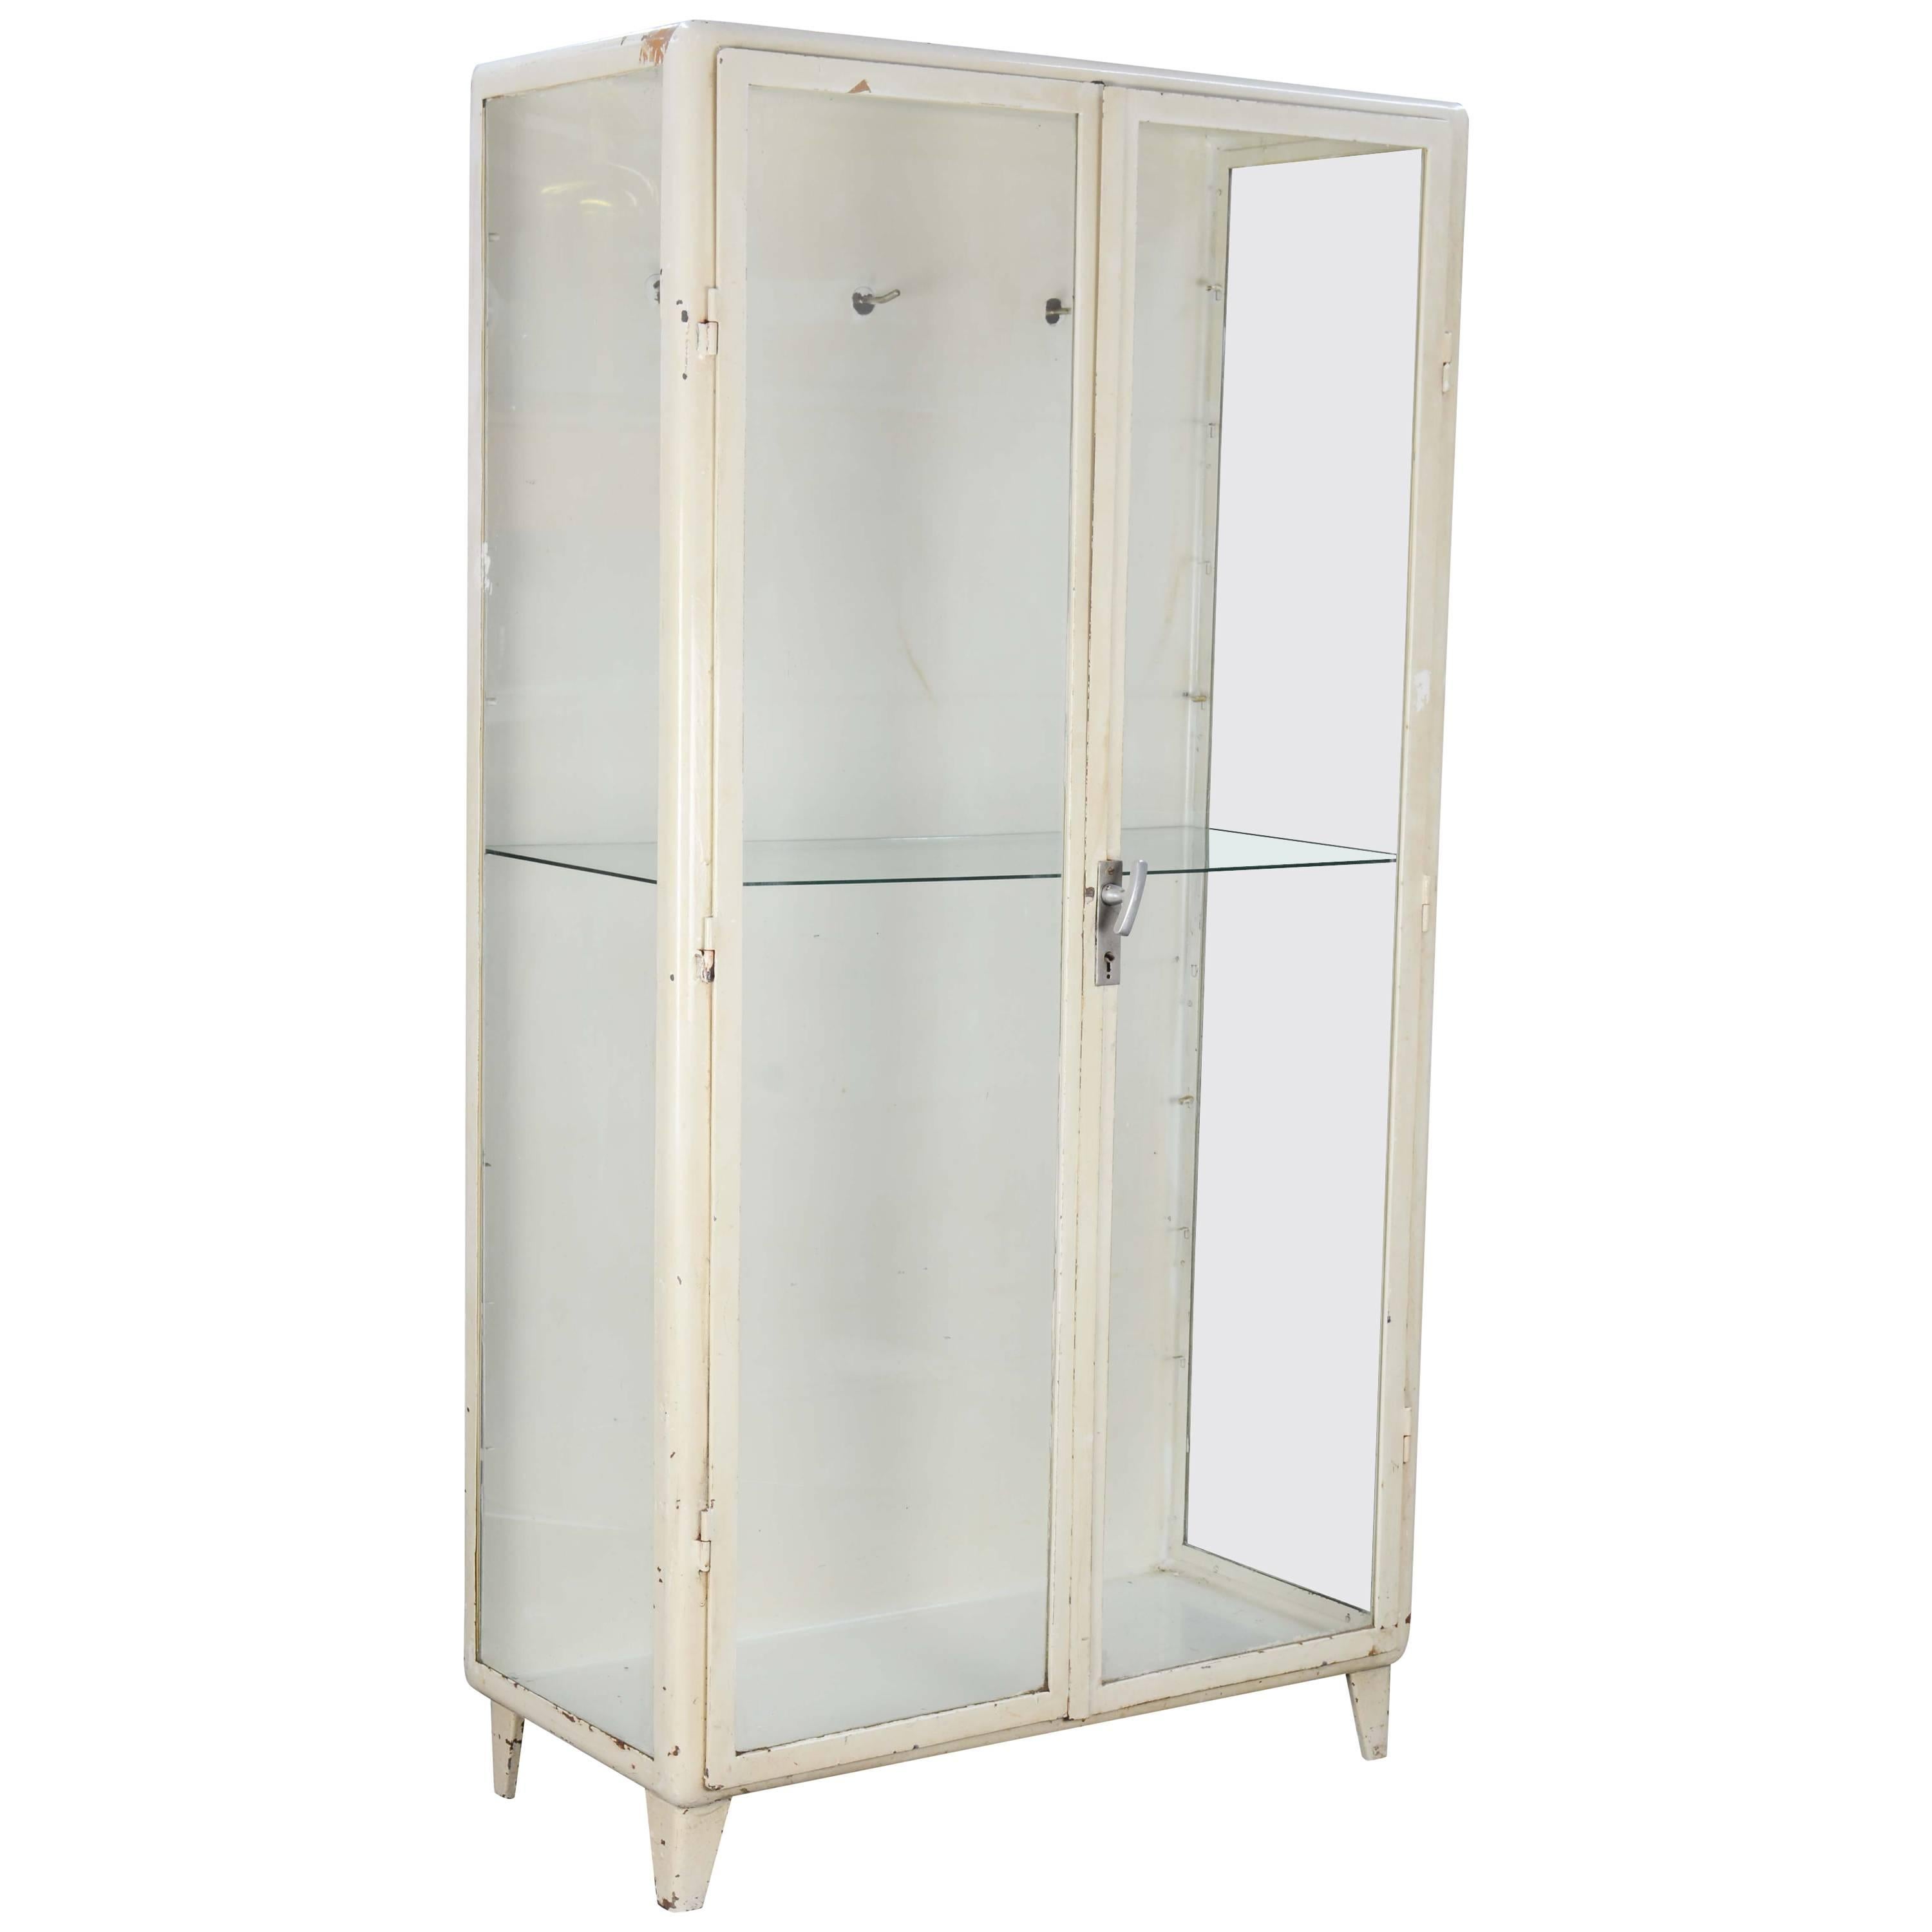 940s Eastern European Medical Cabinets For Sale